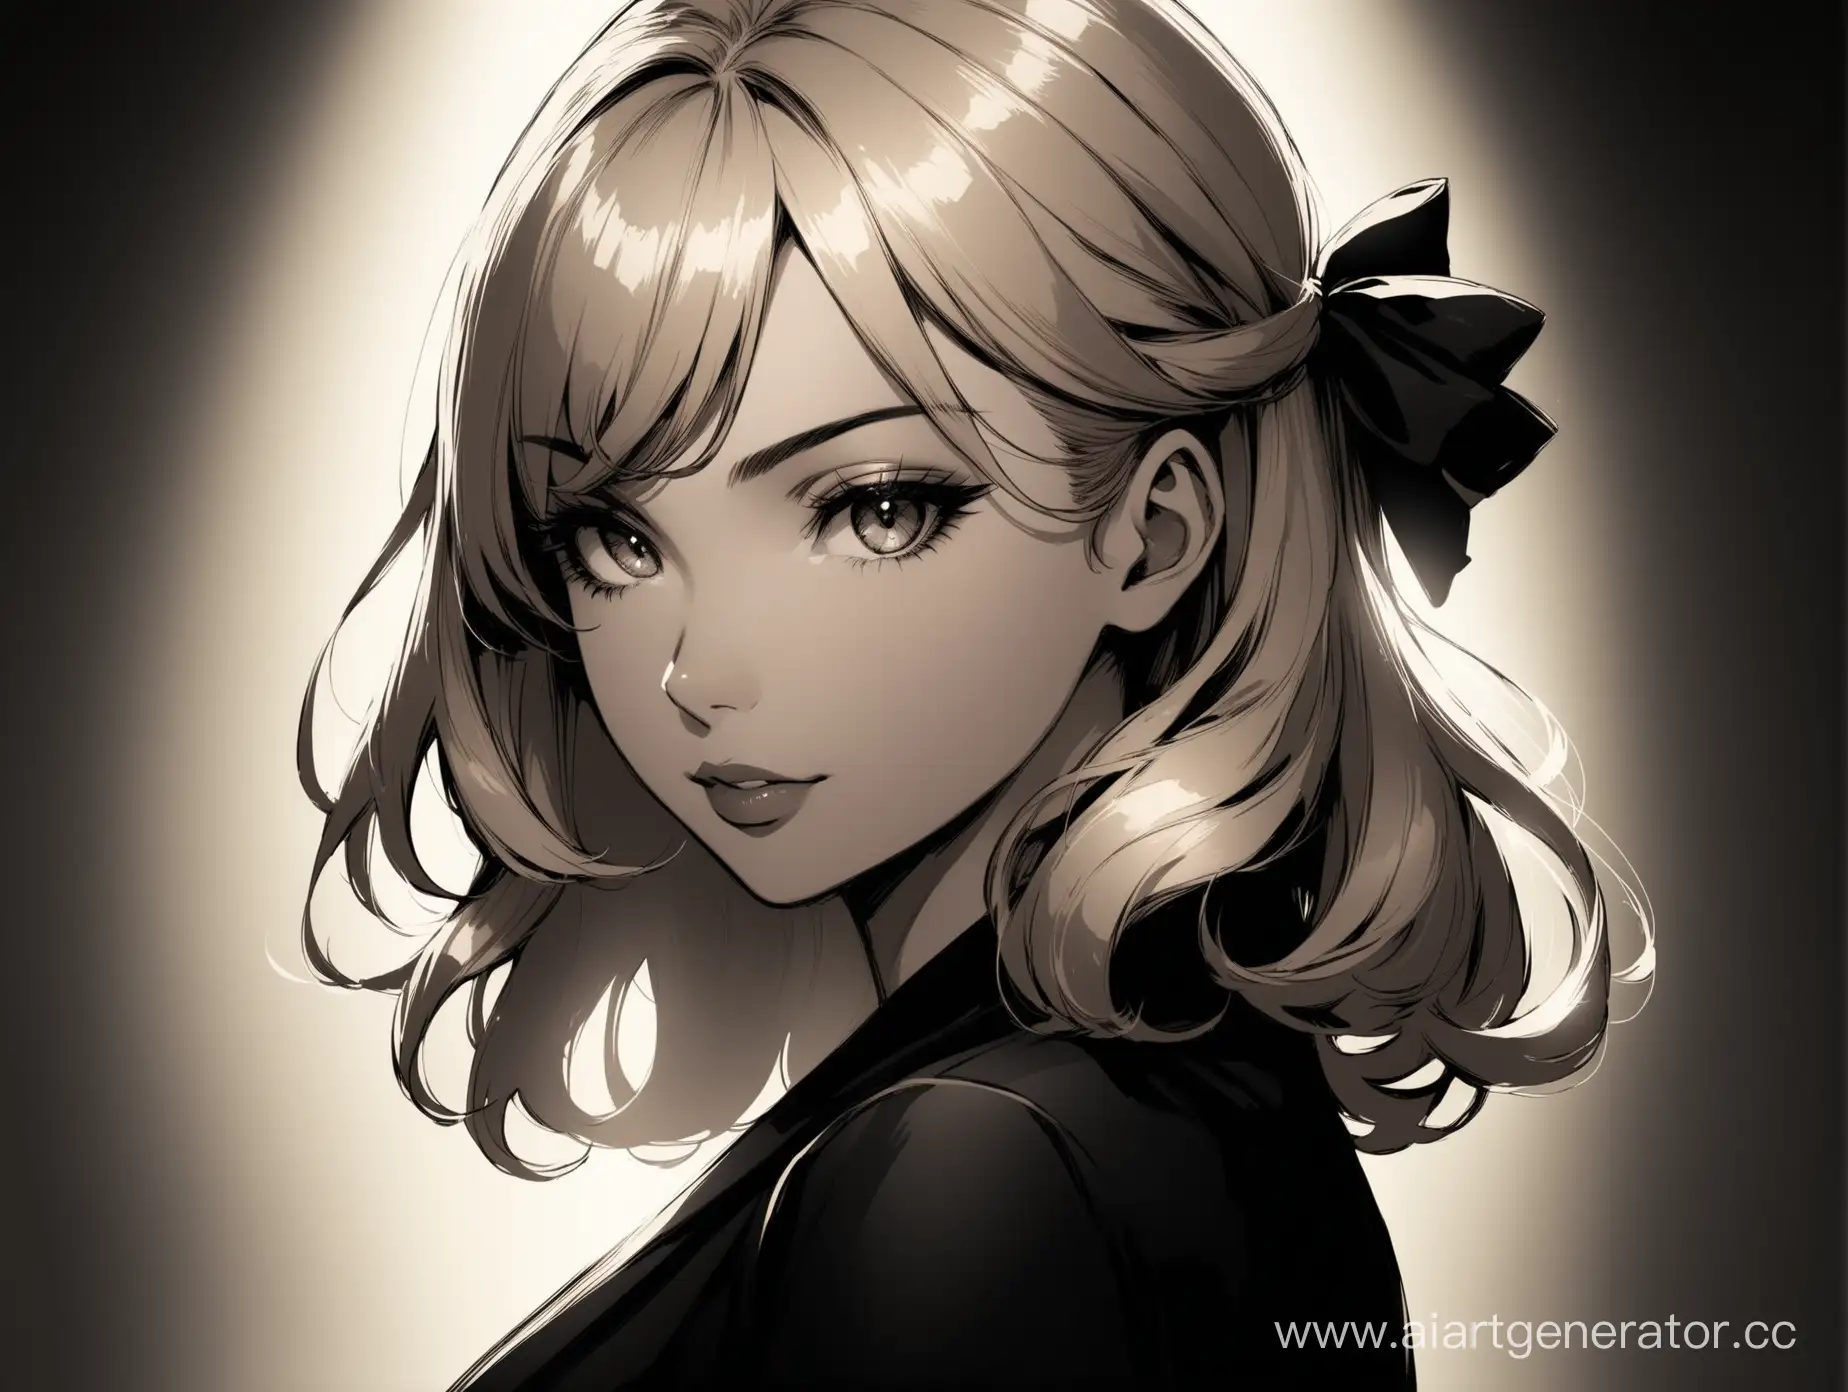 Elegant-Woman-in-Noir-Style-with-Light-Hair